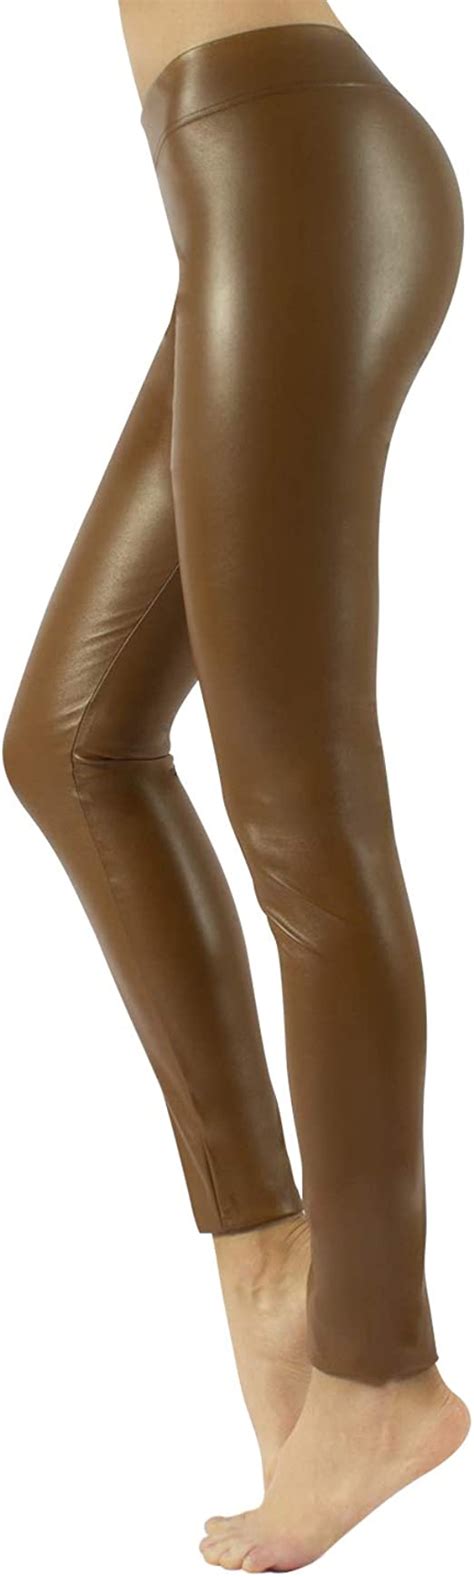 Womens Leather Leggings Stretchy Faux Leather Pants Brown Xs S M